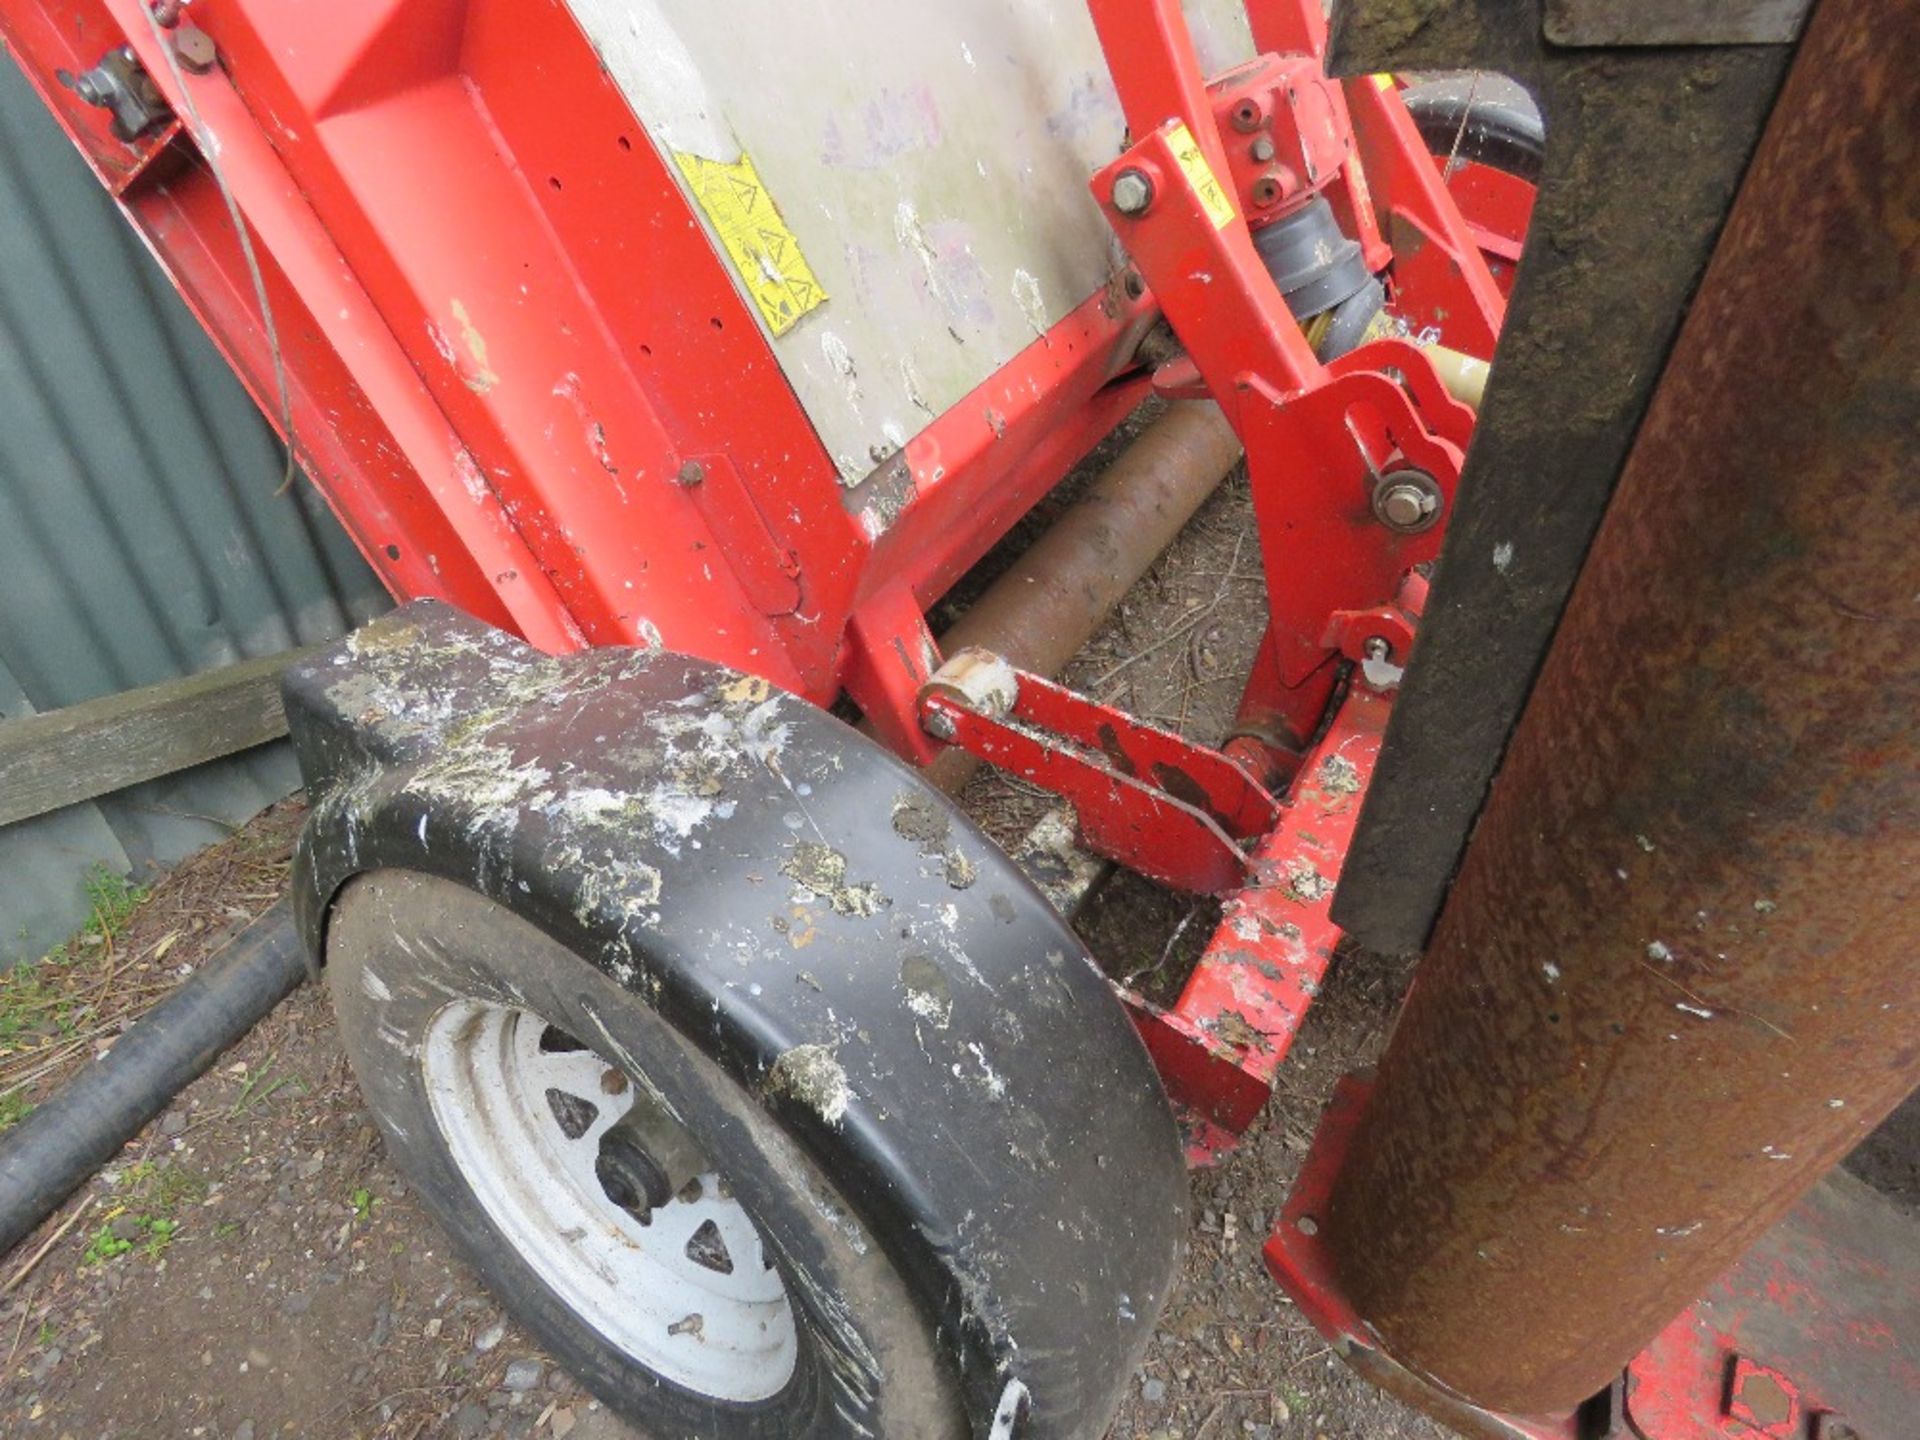 TRIMAX 728-610-400 BATWING TYPE ROLLER MOWER, YEAR 2017. PEGASUS S3 HEADS. NB: REQUIRES SOME REPAIR - Image 9 of 11